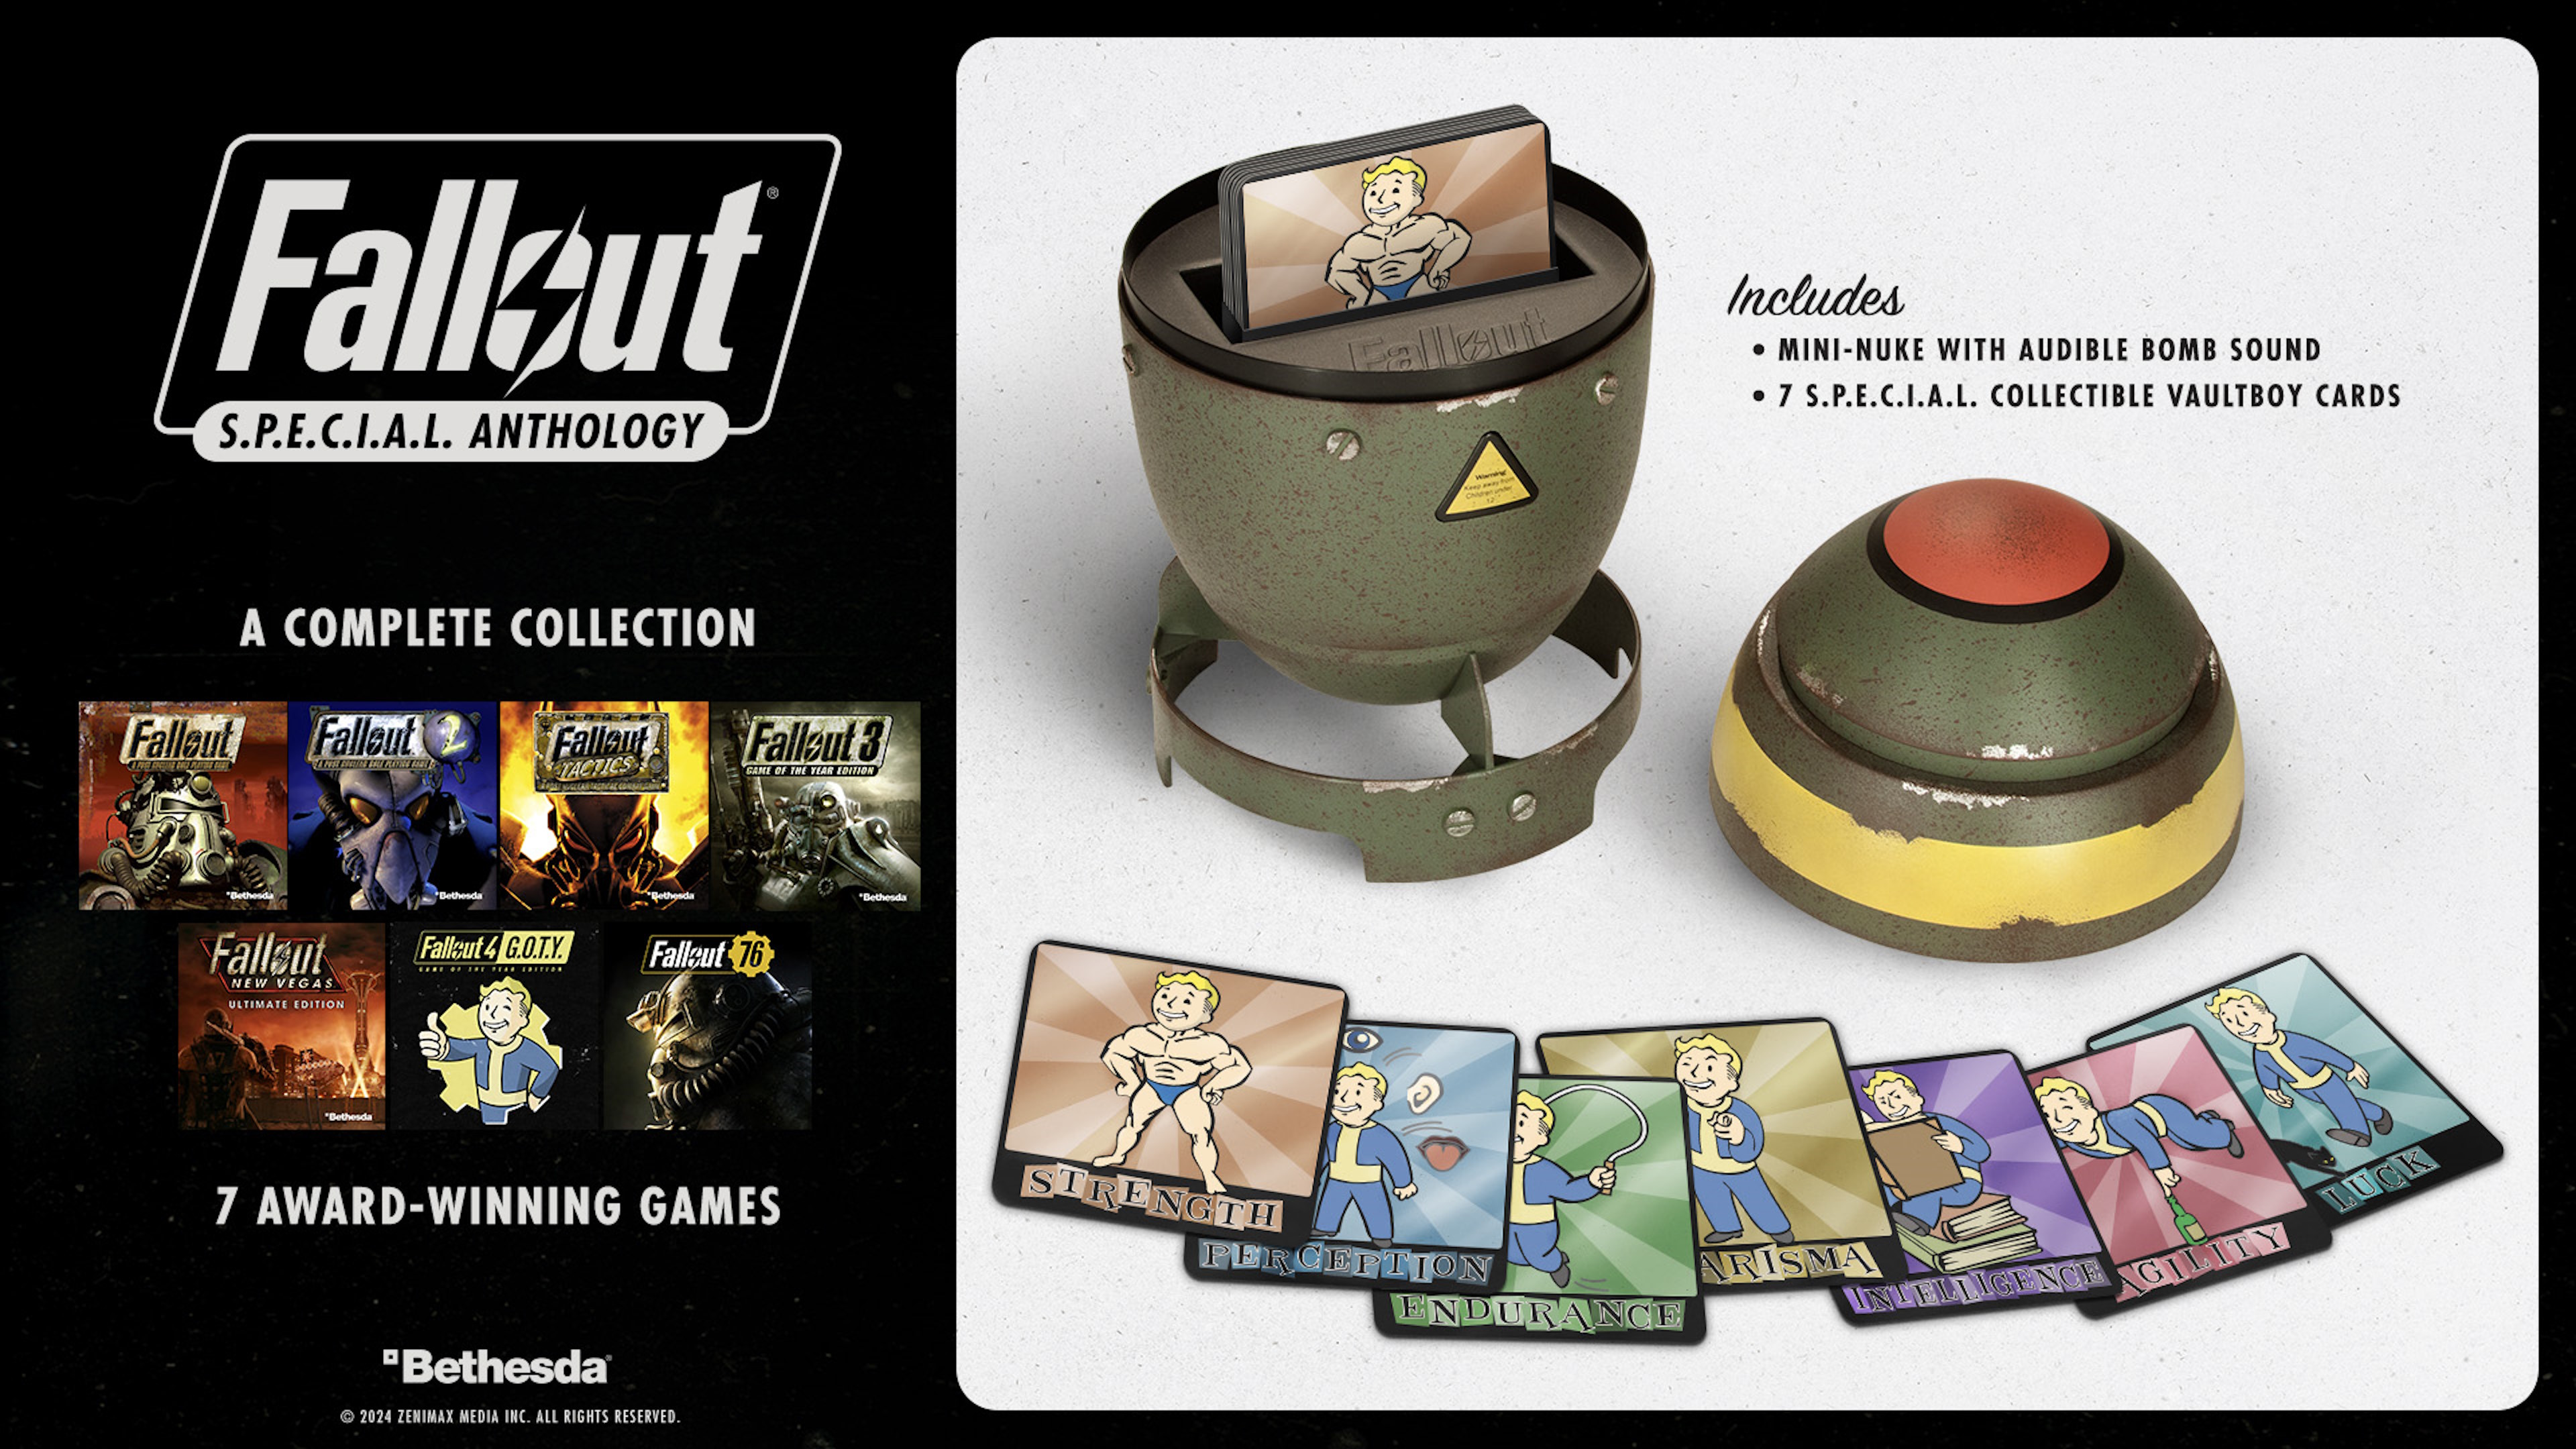 amazon, a new fallout anthology stuffed inside a mini-nuke is set to drop the day before the fallout tv series on amazon